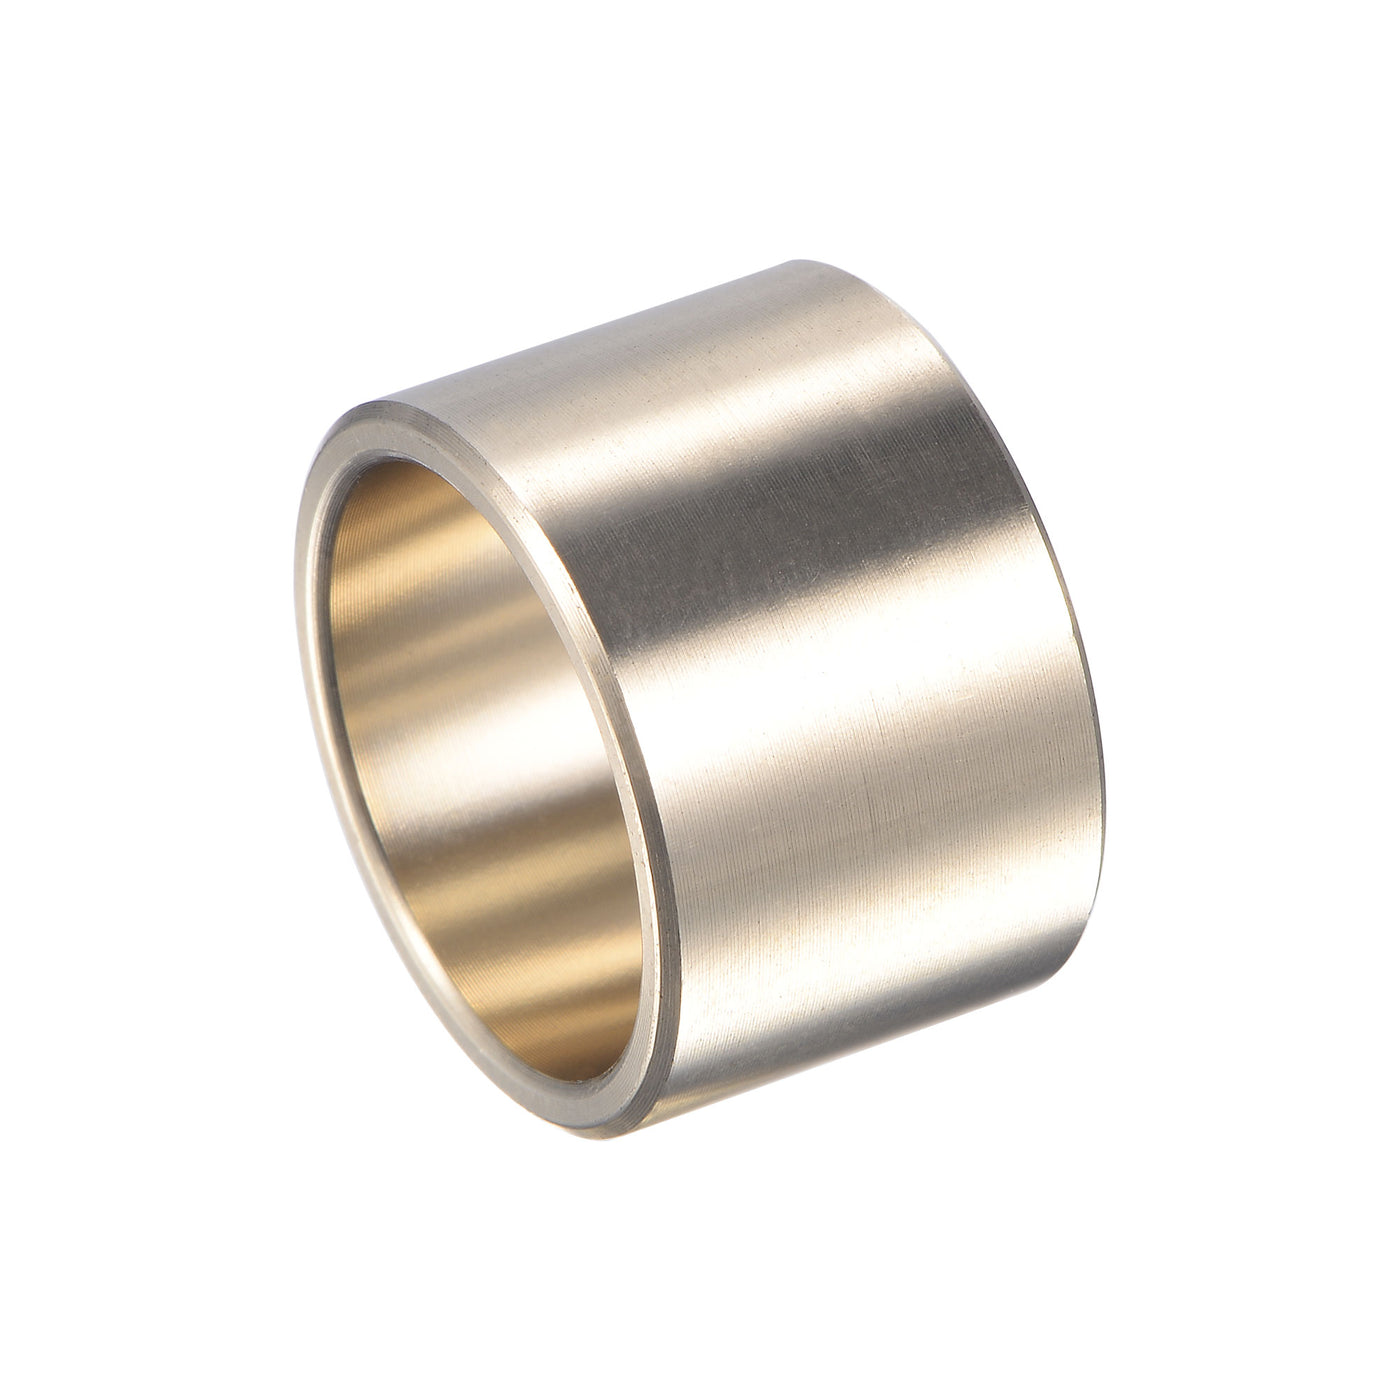 uxcell Uxcell Sleeve Bearings Length Cast Brass Self-Lubricating Bushing